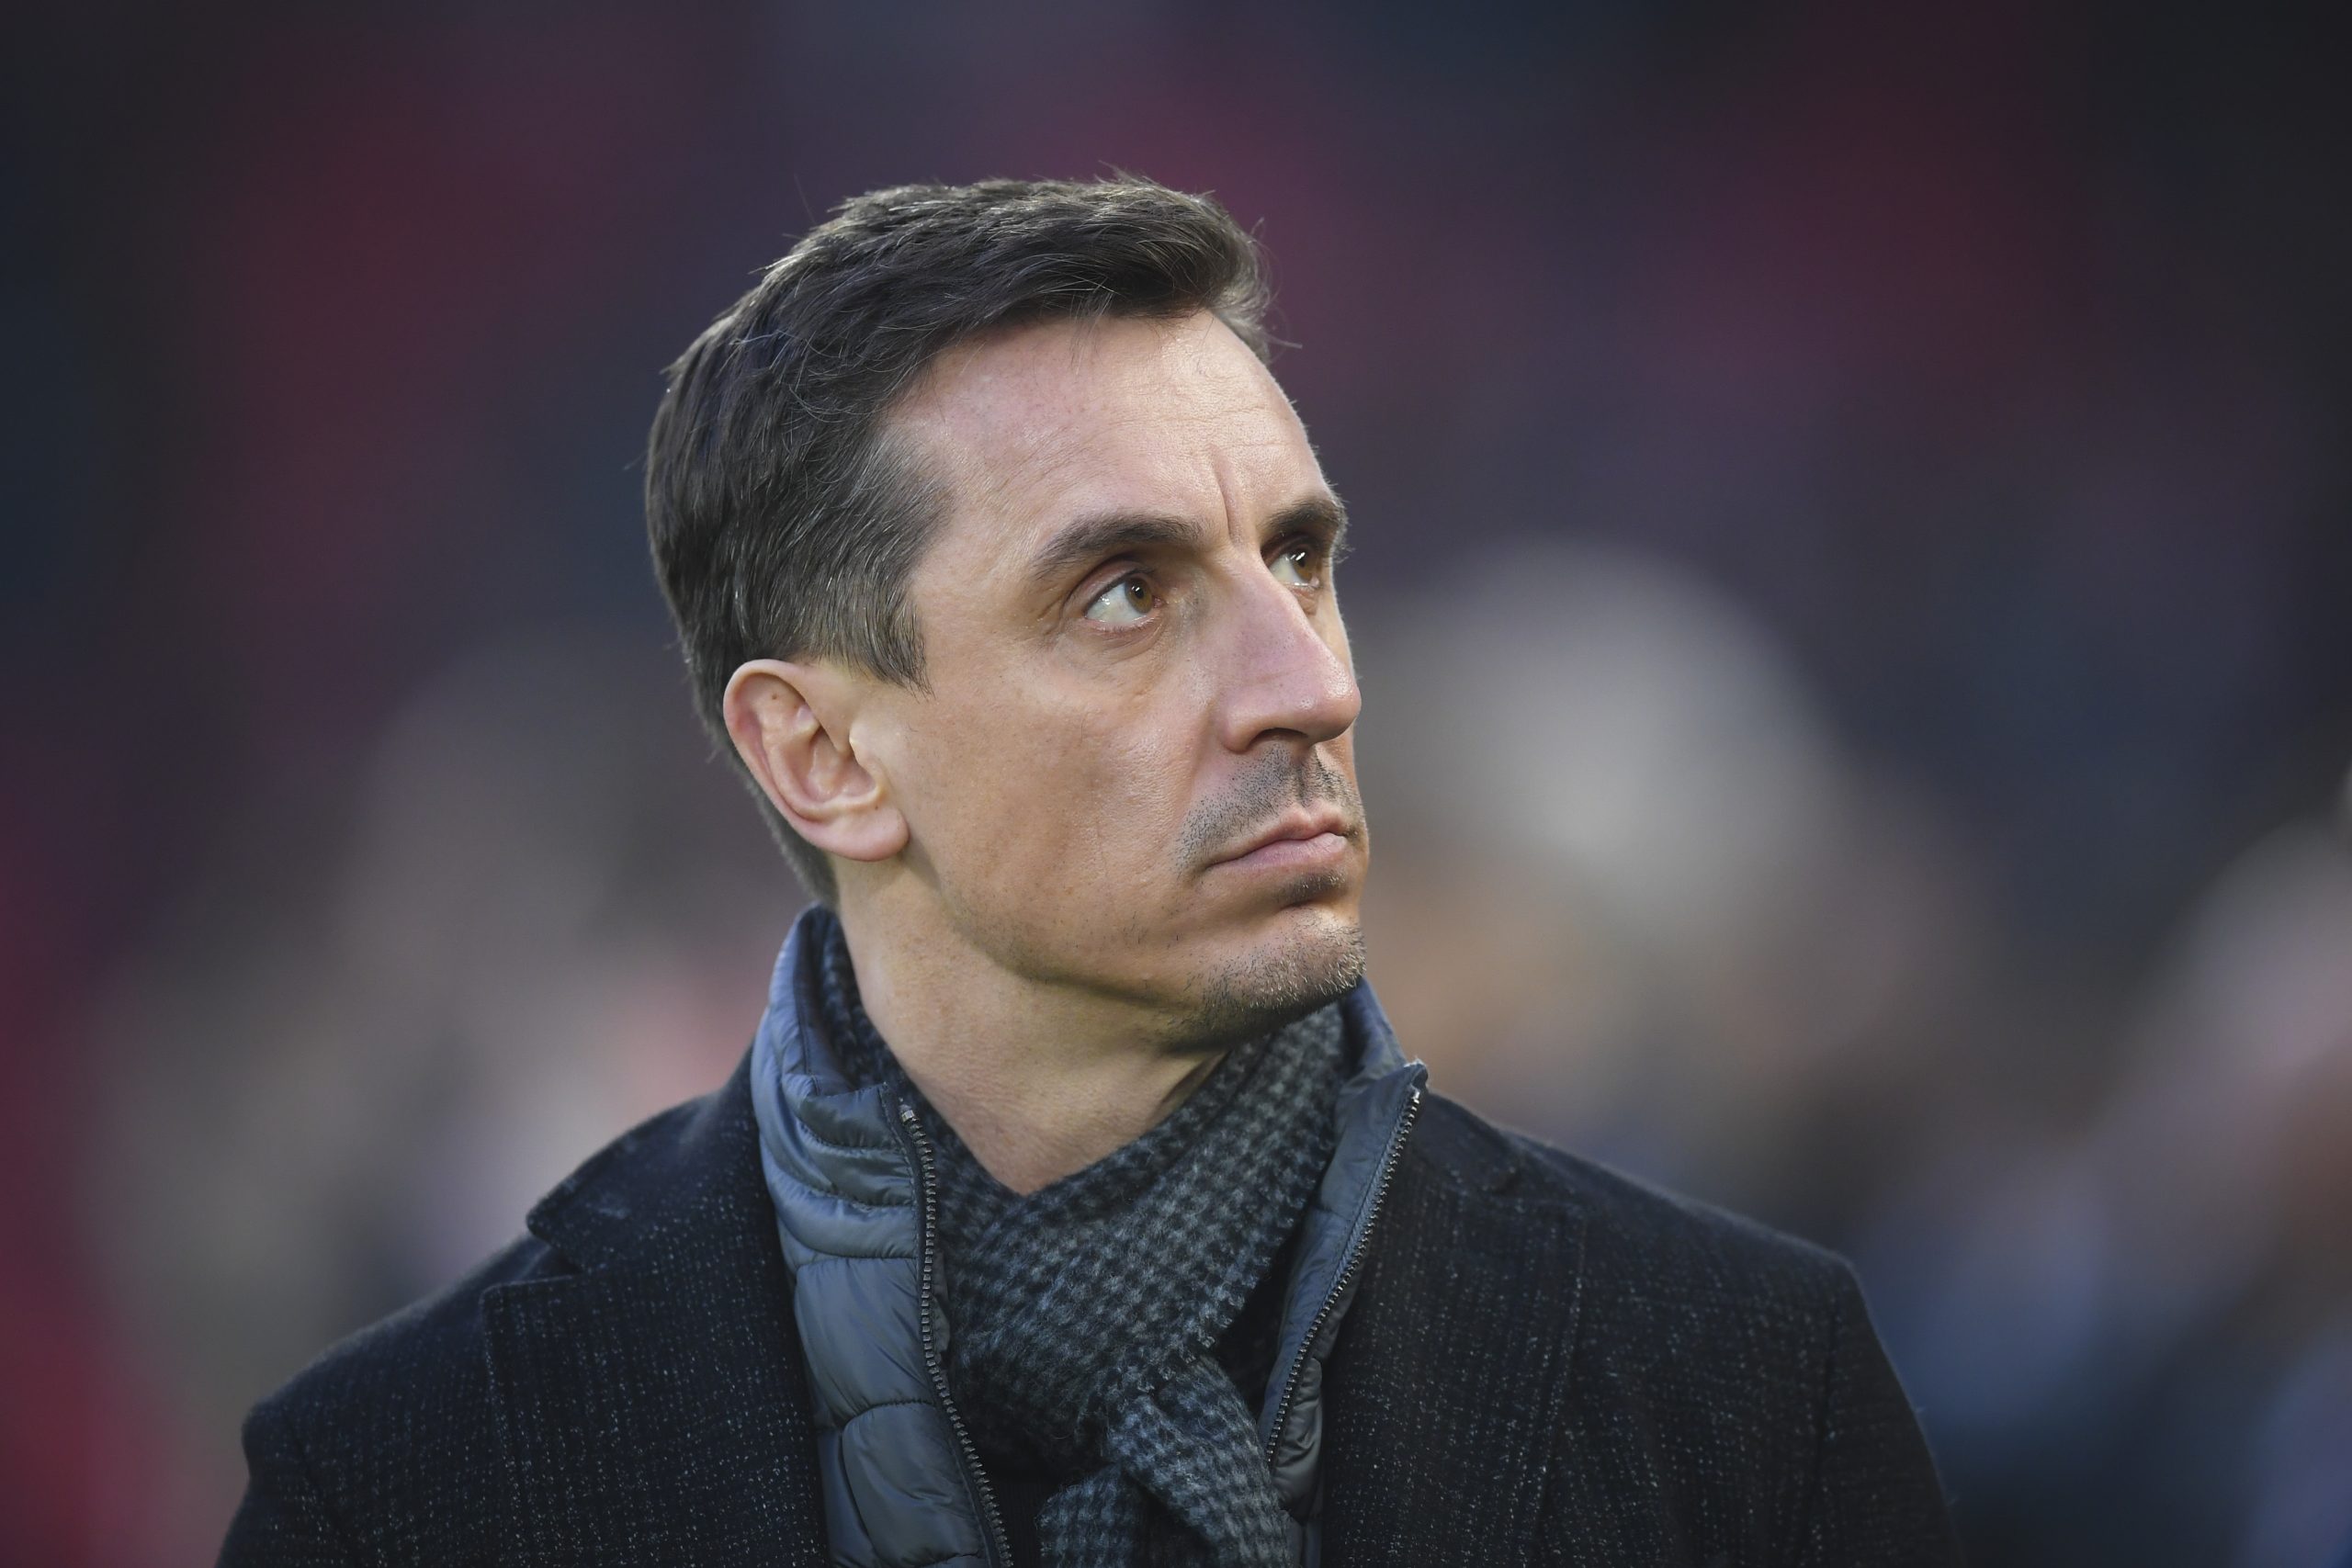 Gary Neville has voiced alarm about Chelsea offering new signings long-term contracts.